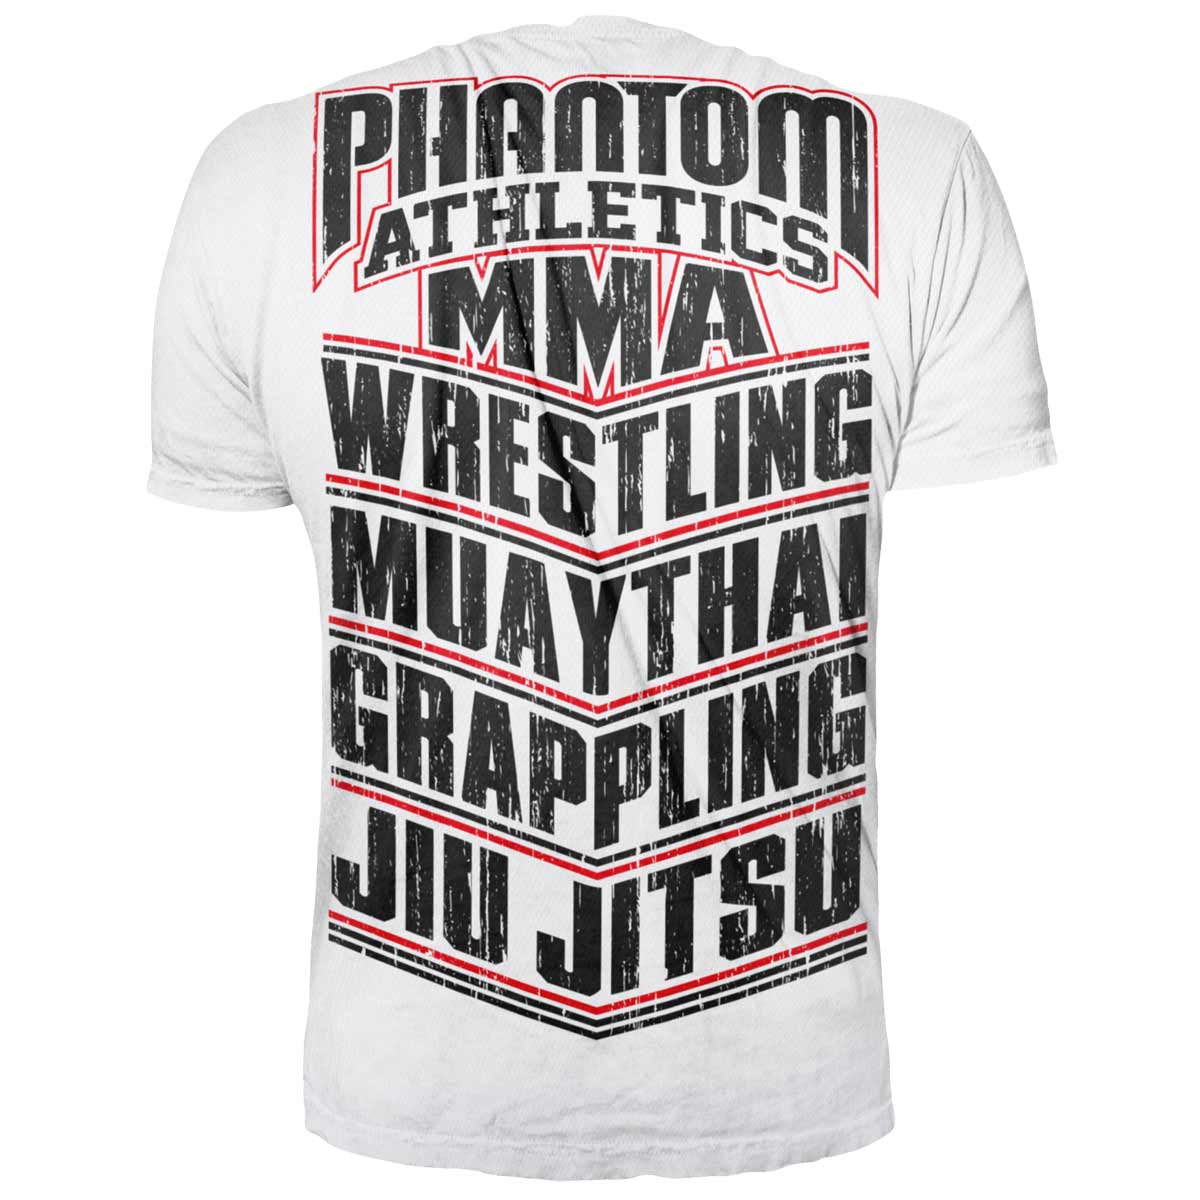 Phantom T-shirt for all martial artists. With MMA, WRESTLING, MUAY THAI, GRAPPLING, JIU JITSU lettering. Ideal for your fight training.